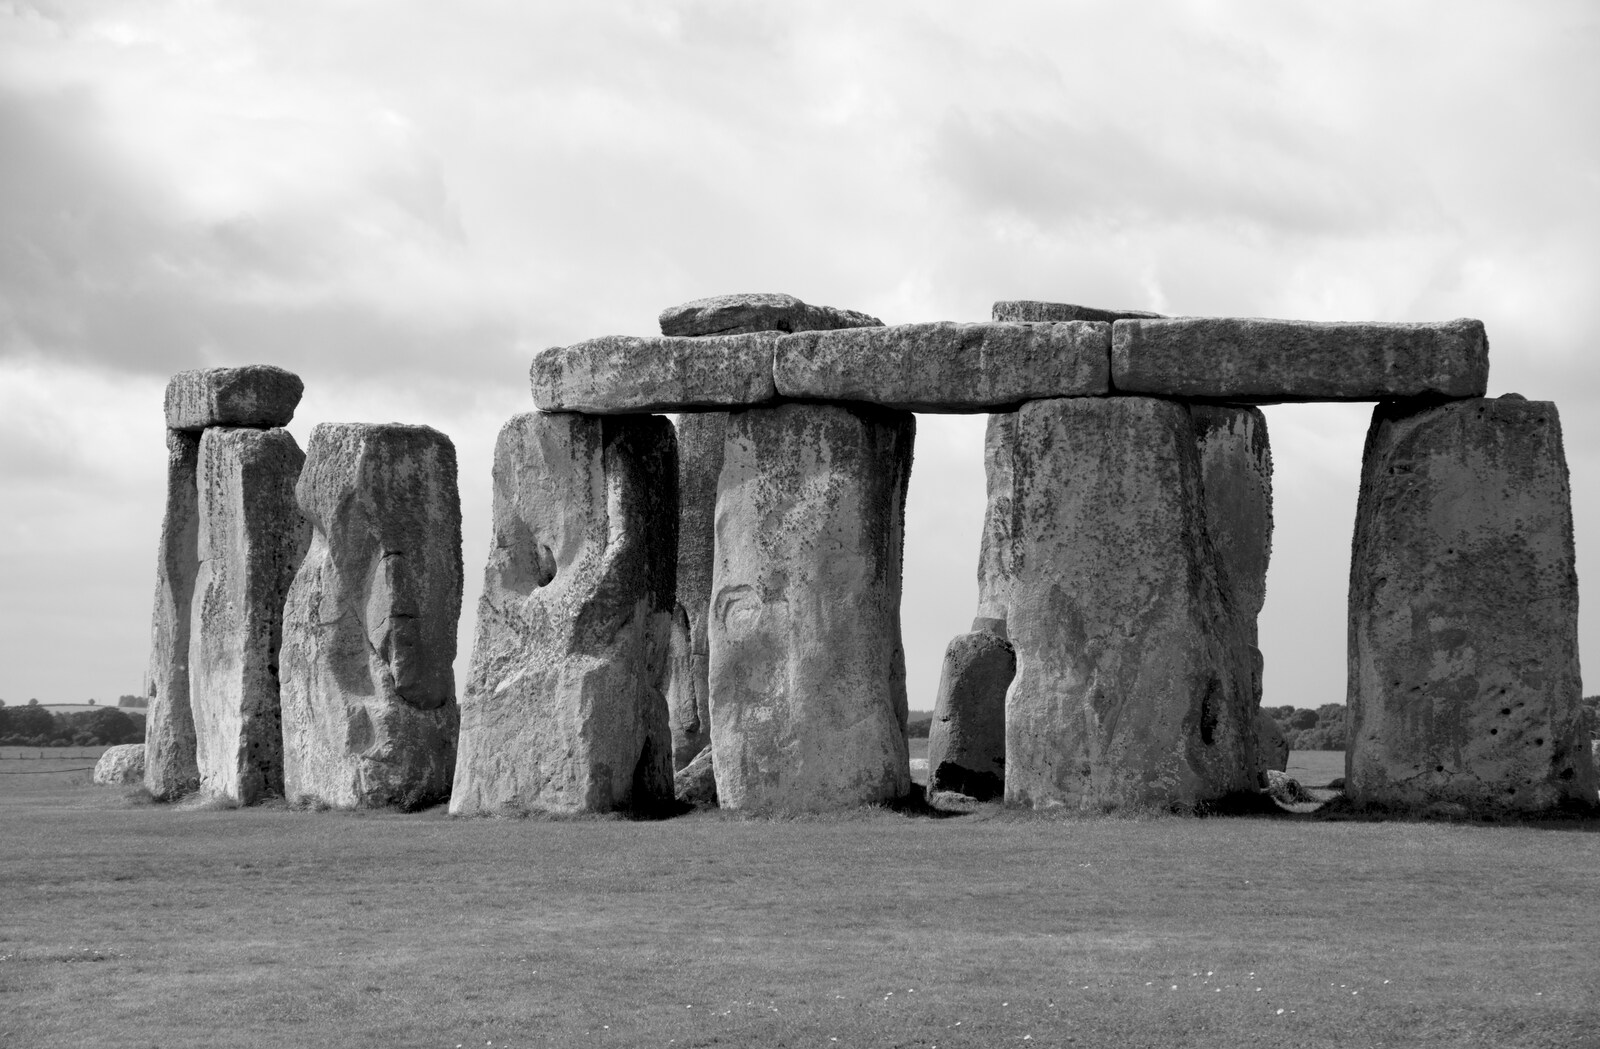 The other side of Stonehenge in black and white from Stone Circles: Stonehenge and Avebury, Wiltshire - 22nd August 2020